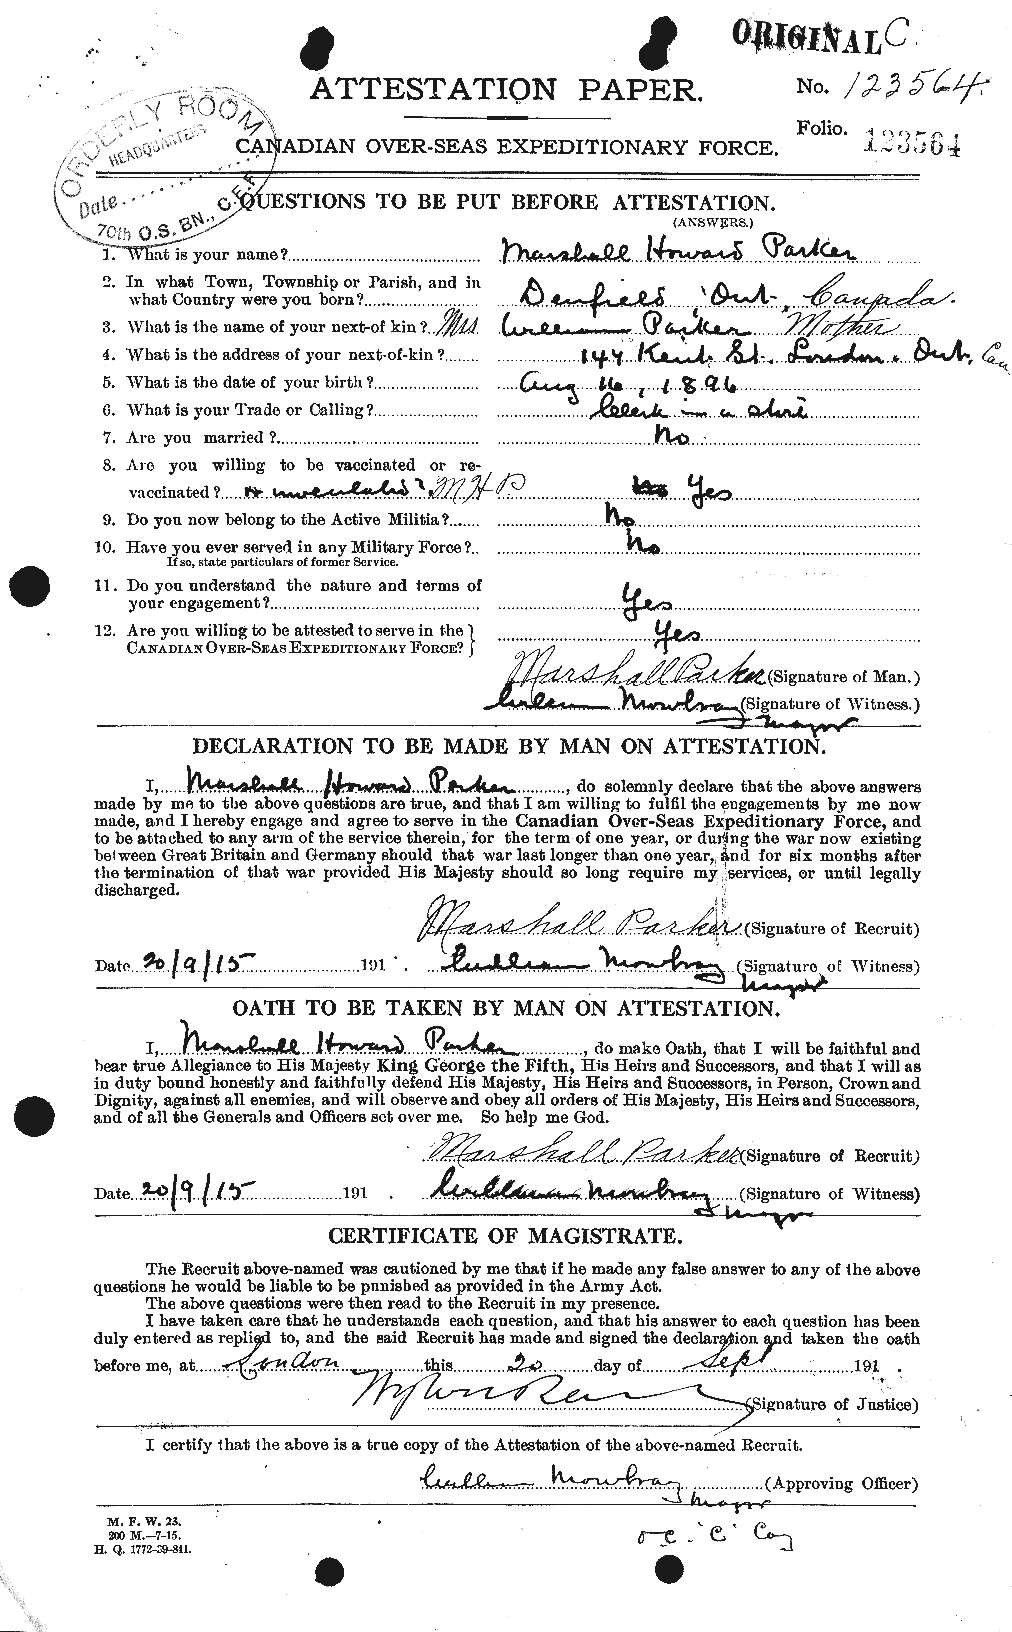 Personnel Records of the First World War - CEF 565544a